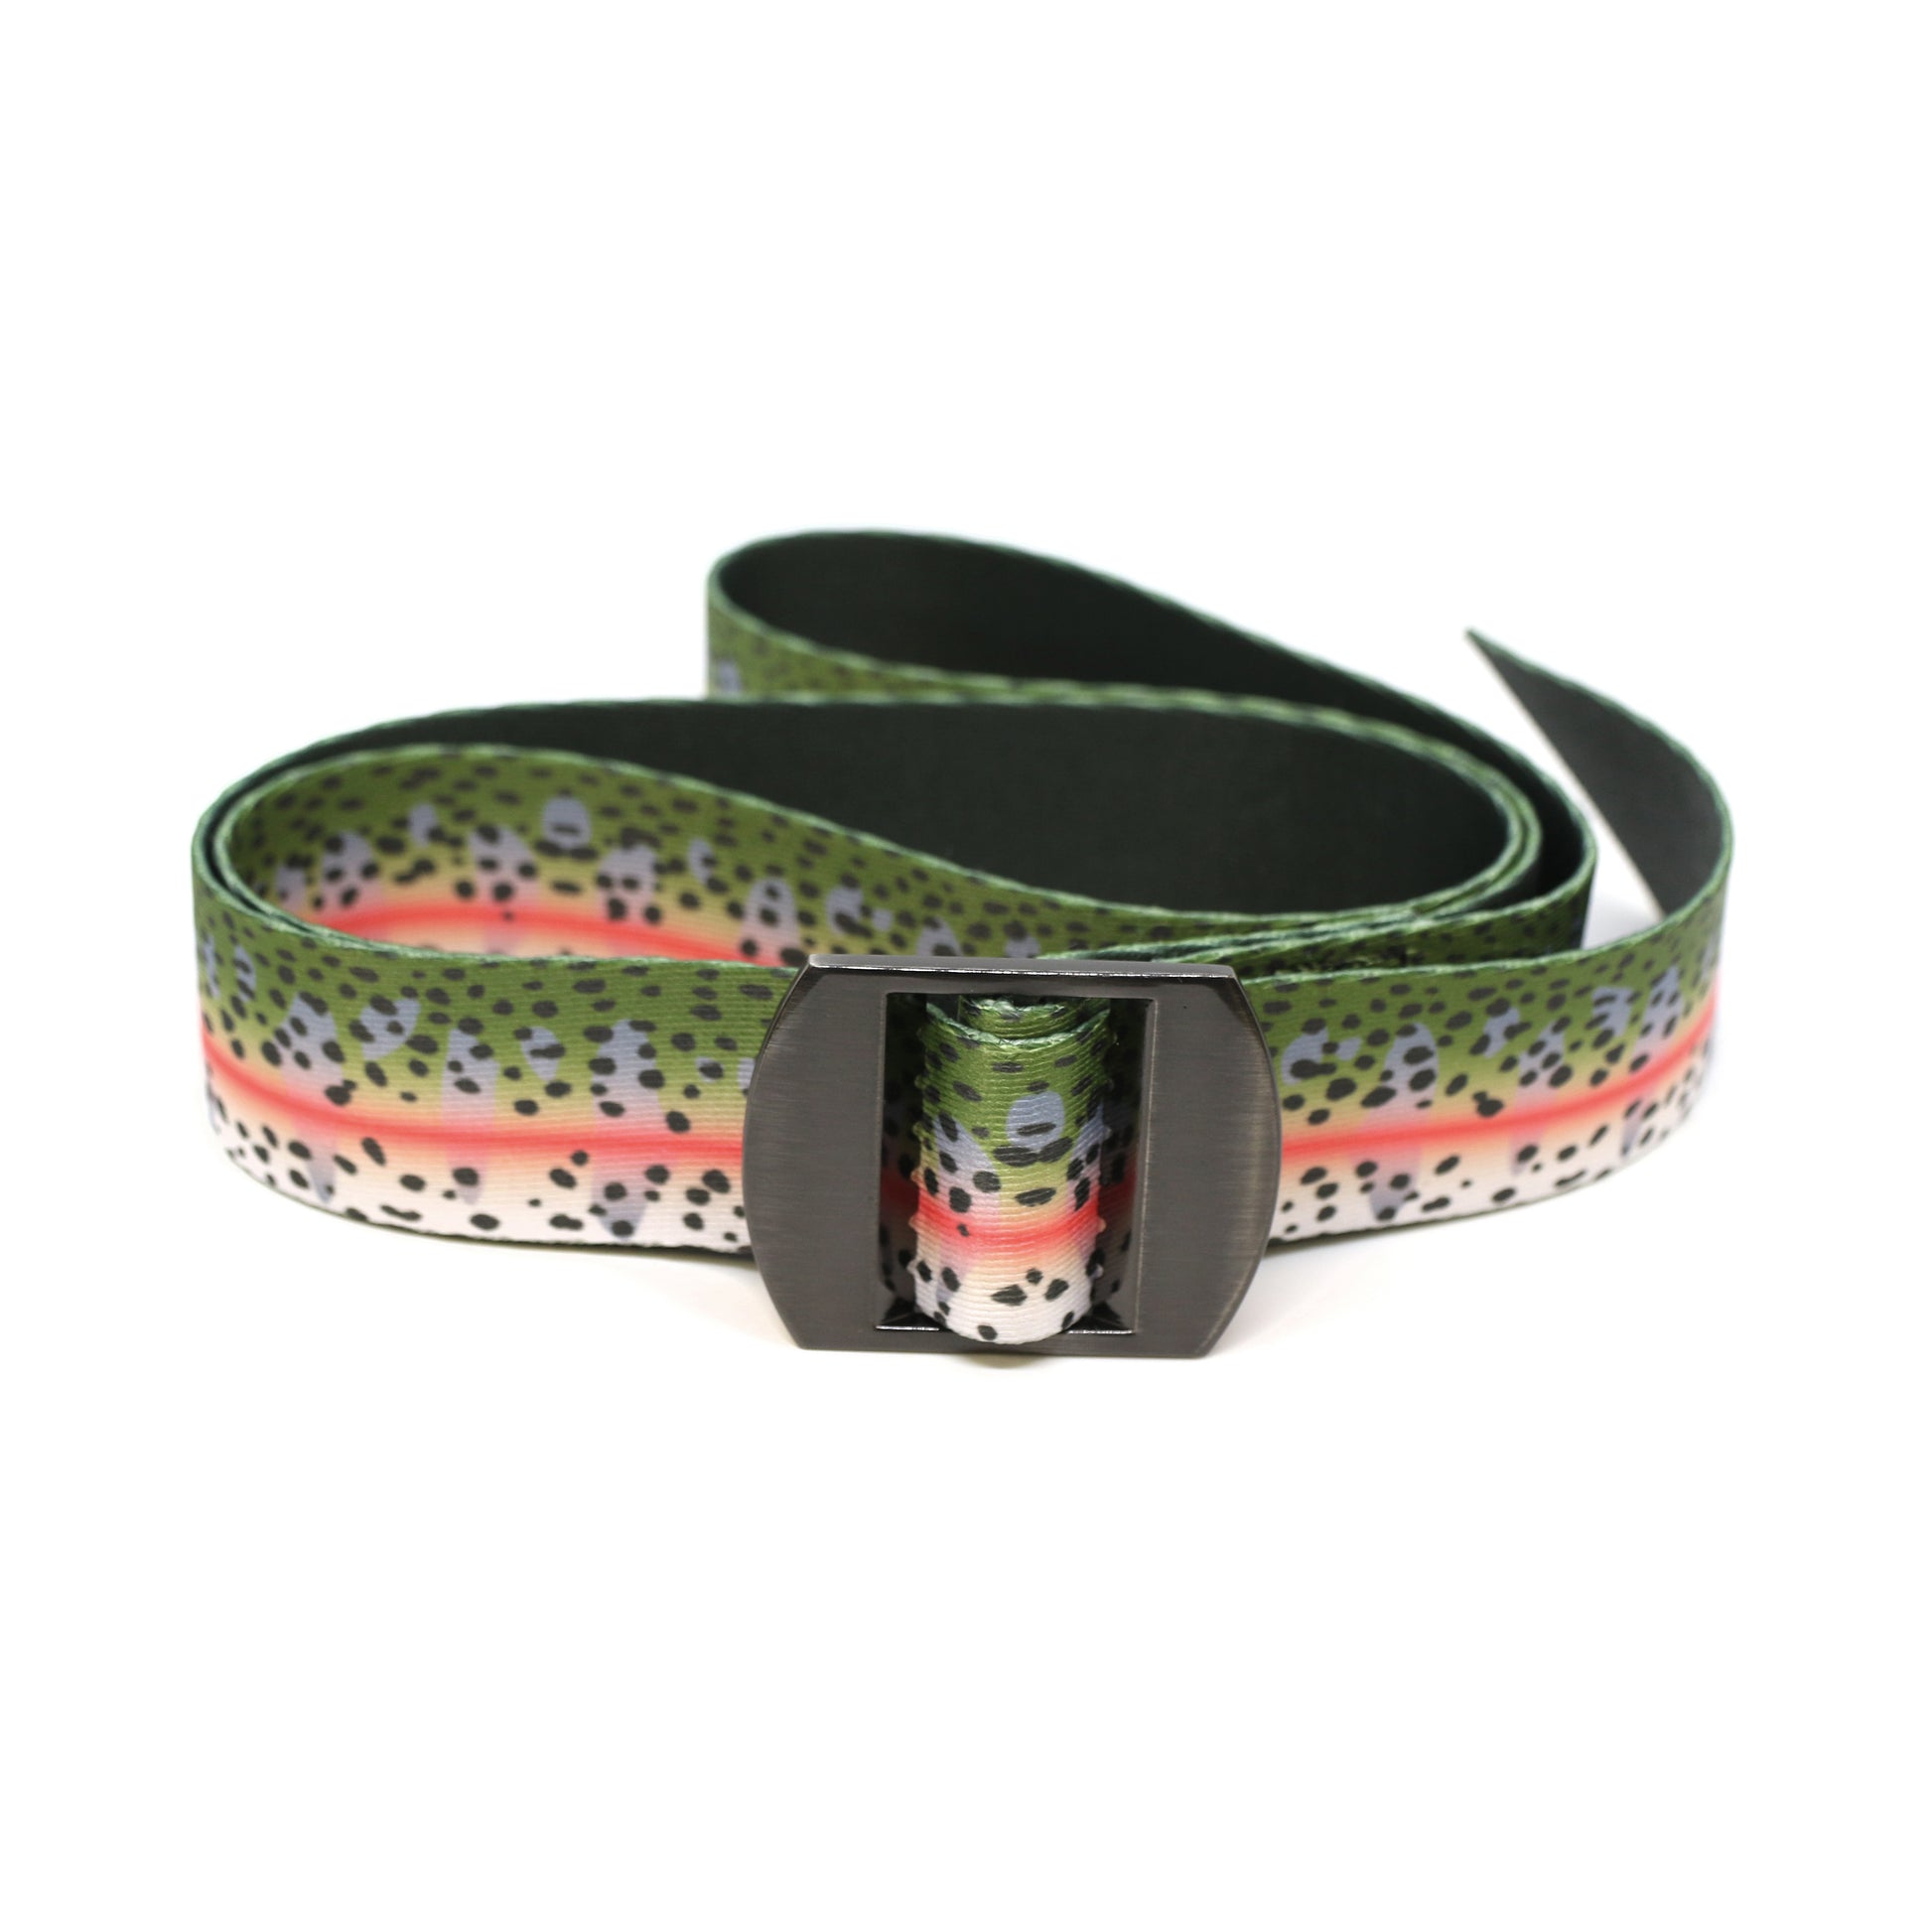 A nylon belt with a metal buckle has rainbow trout print